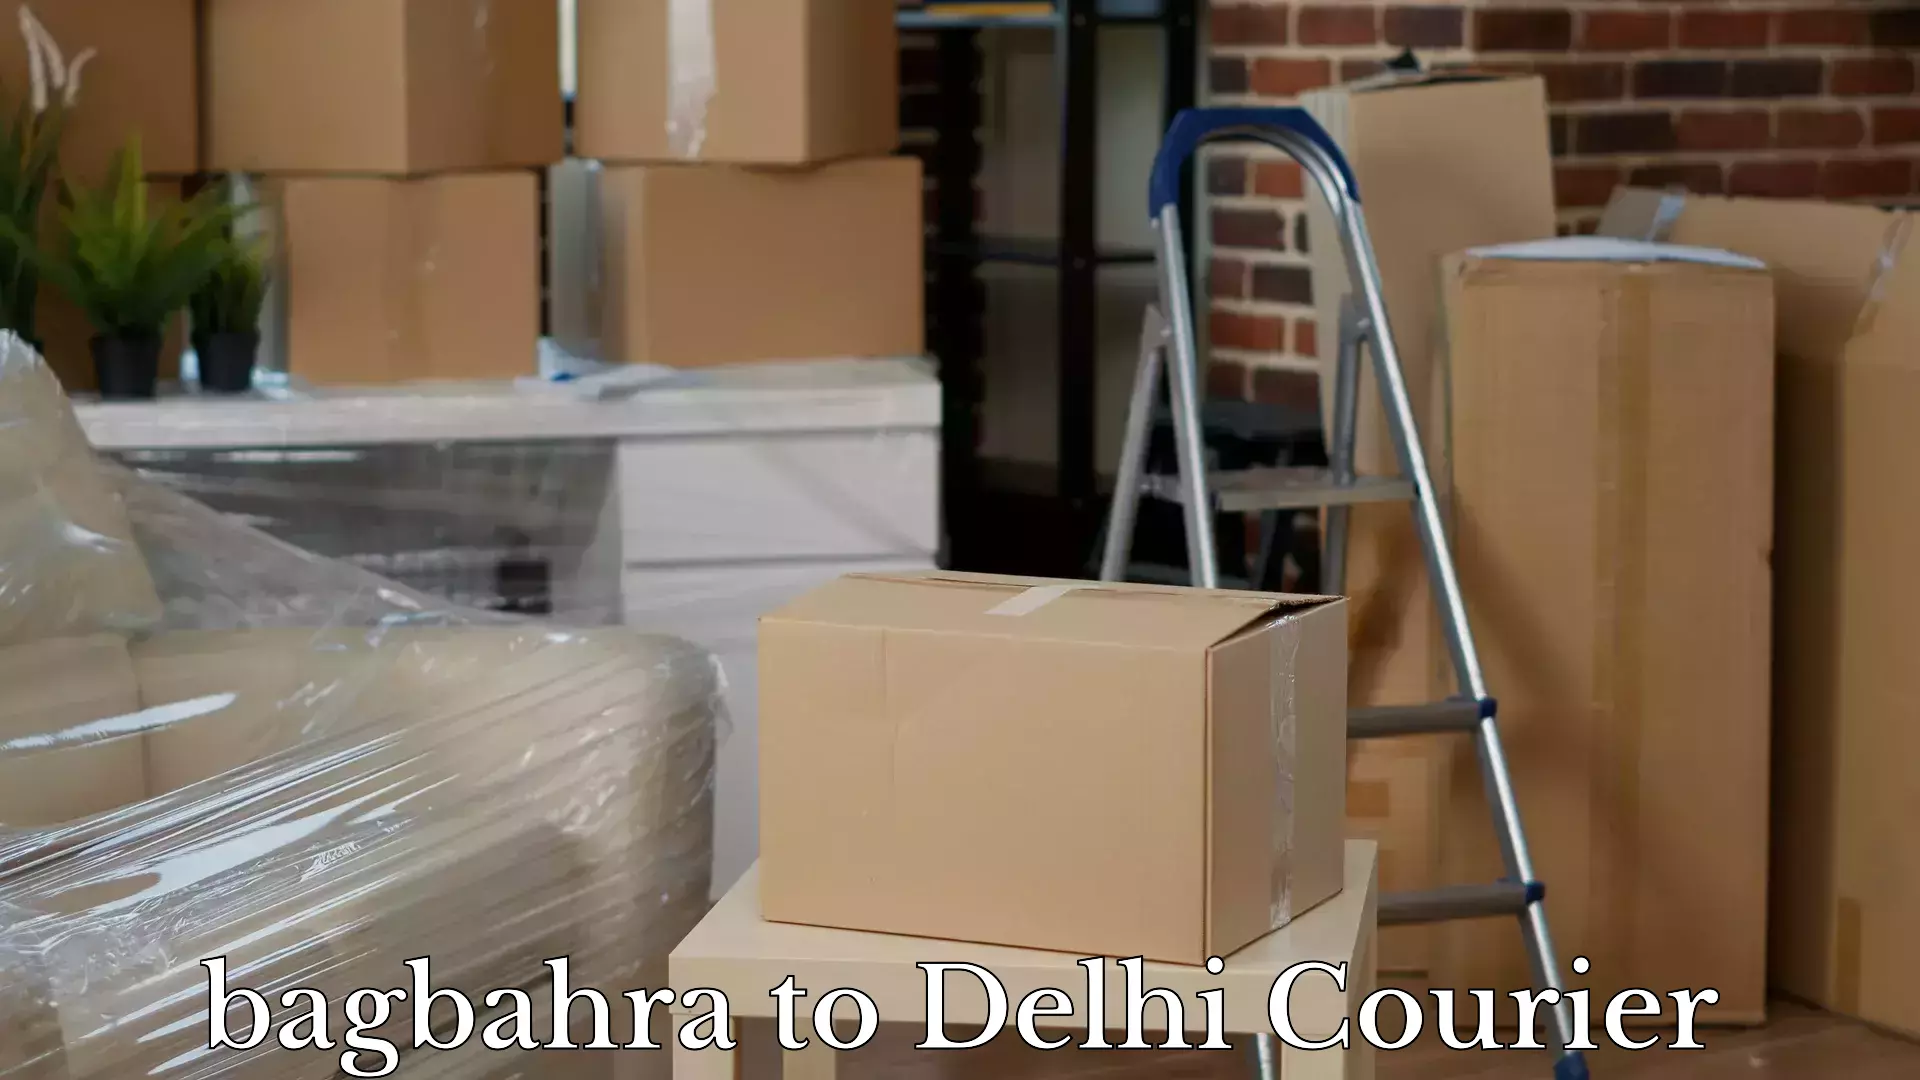 Instant baggage transport quote in bagbahra to NCR